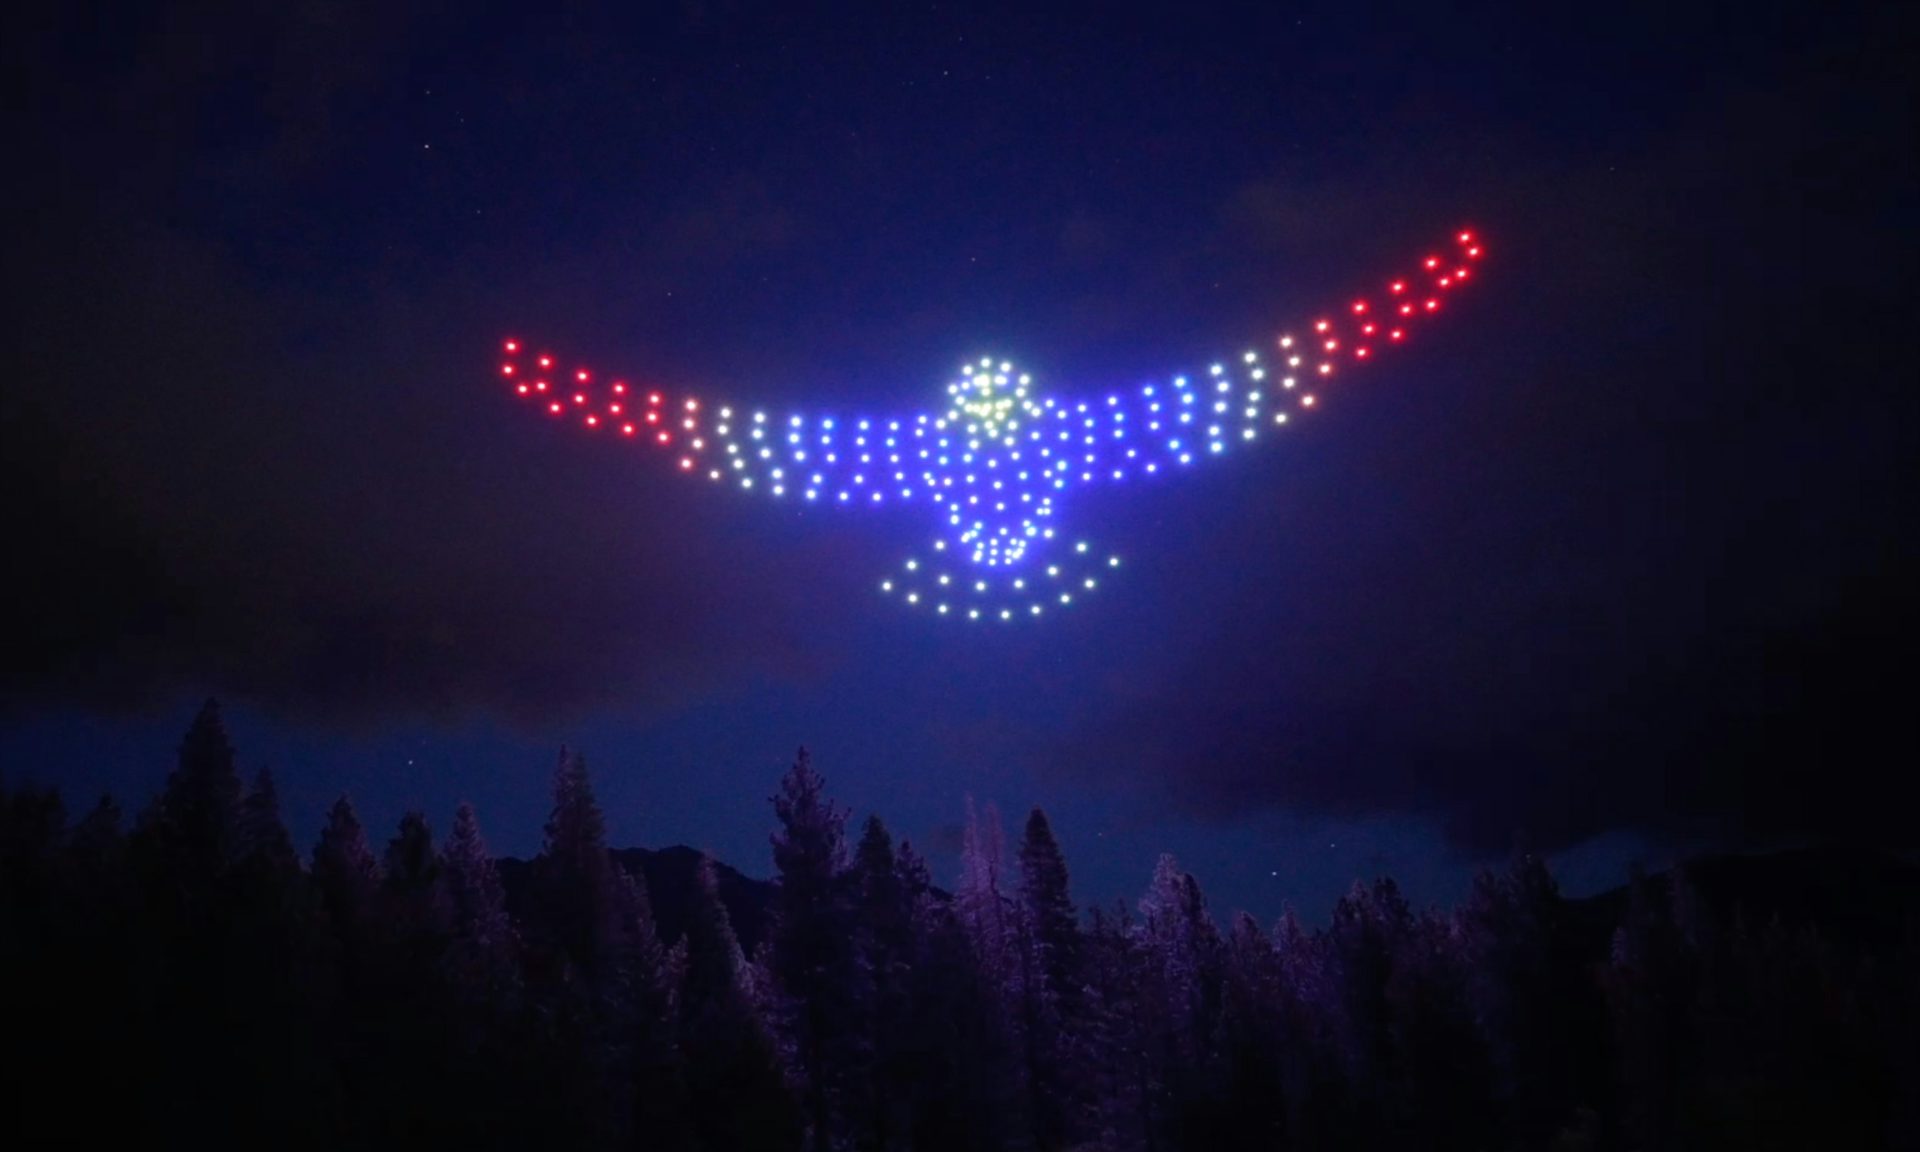 Verge Aero celebrates Independence Day with multiple drone shows in Florida, Colorado, Nevada and California.